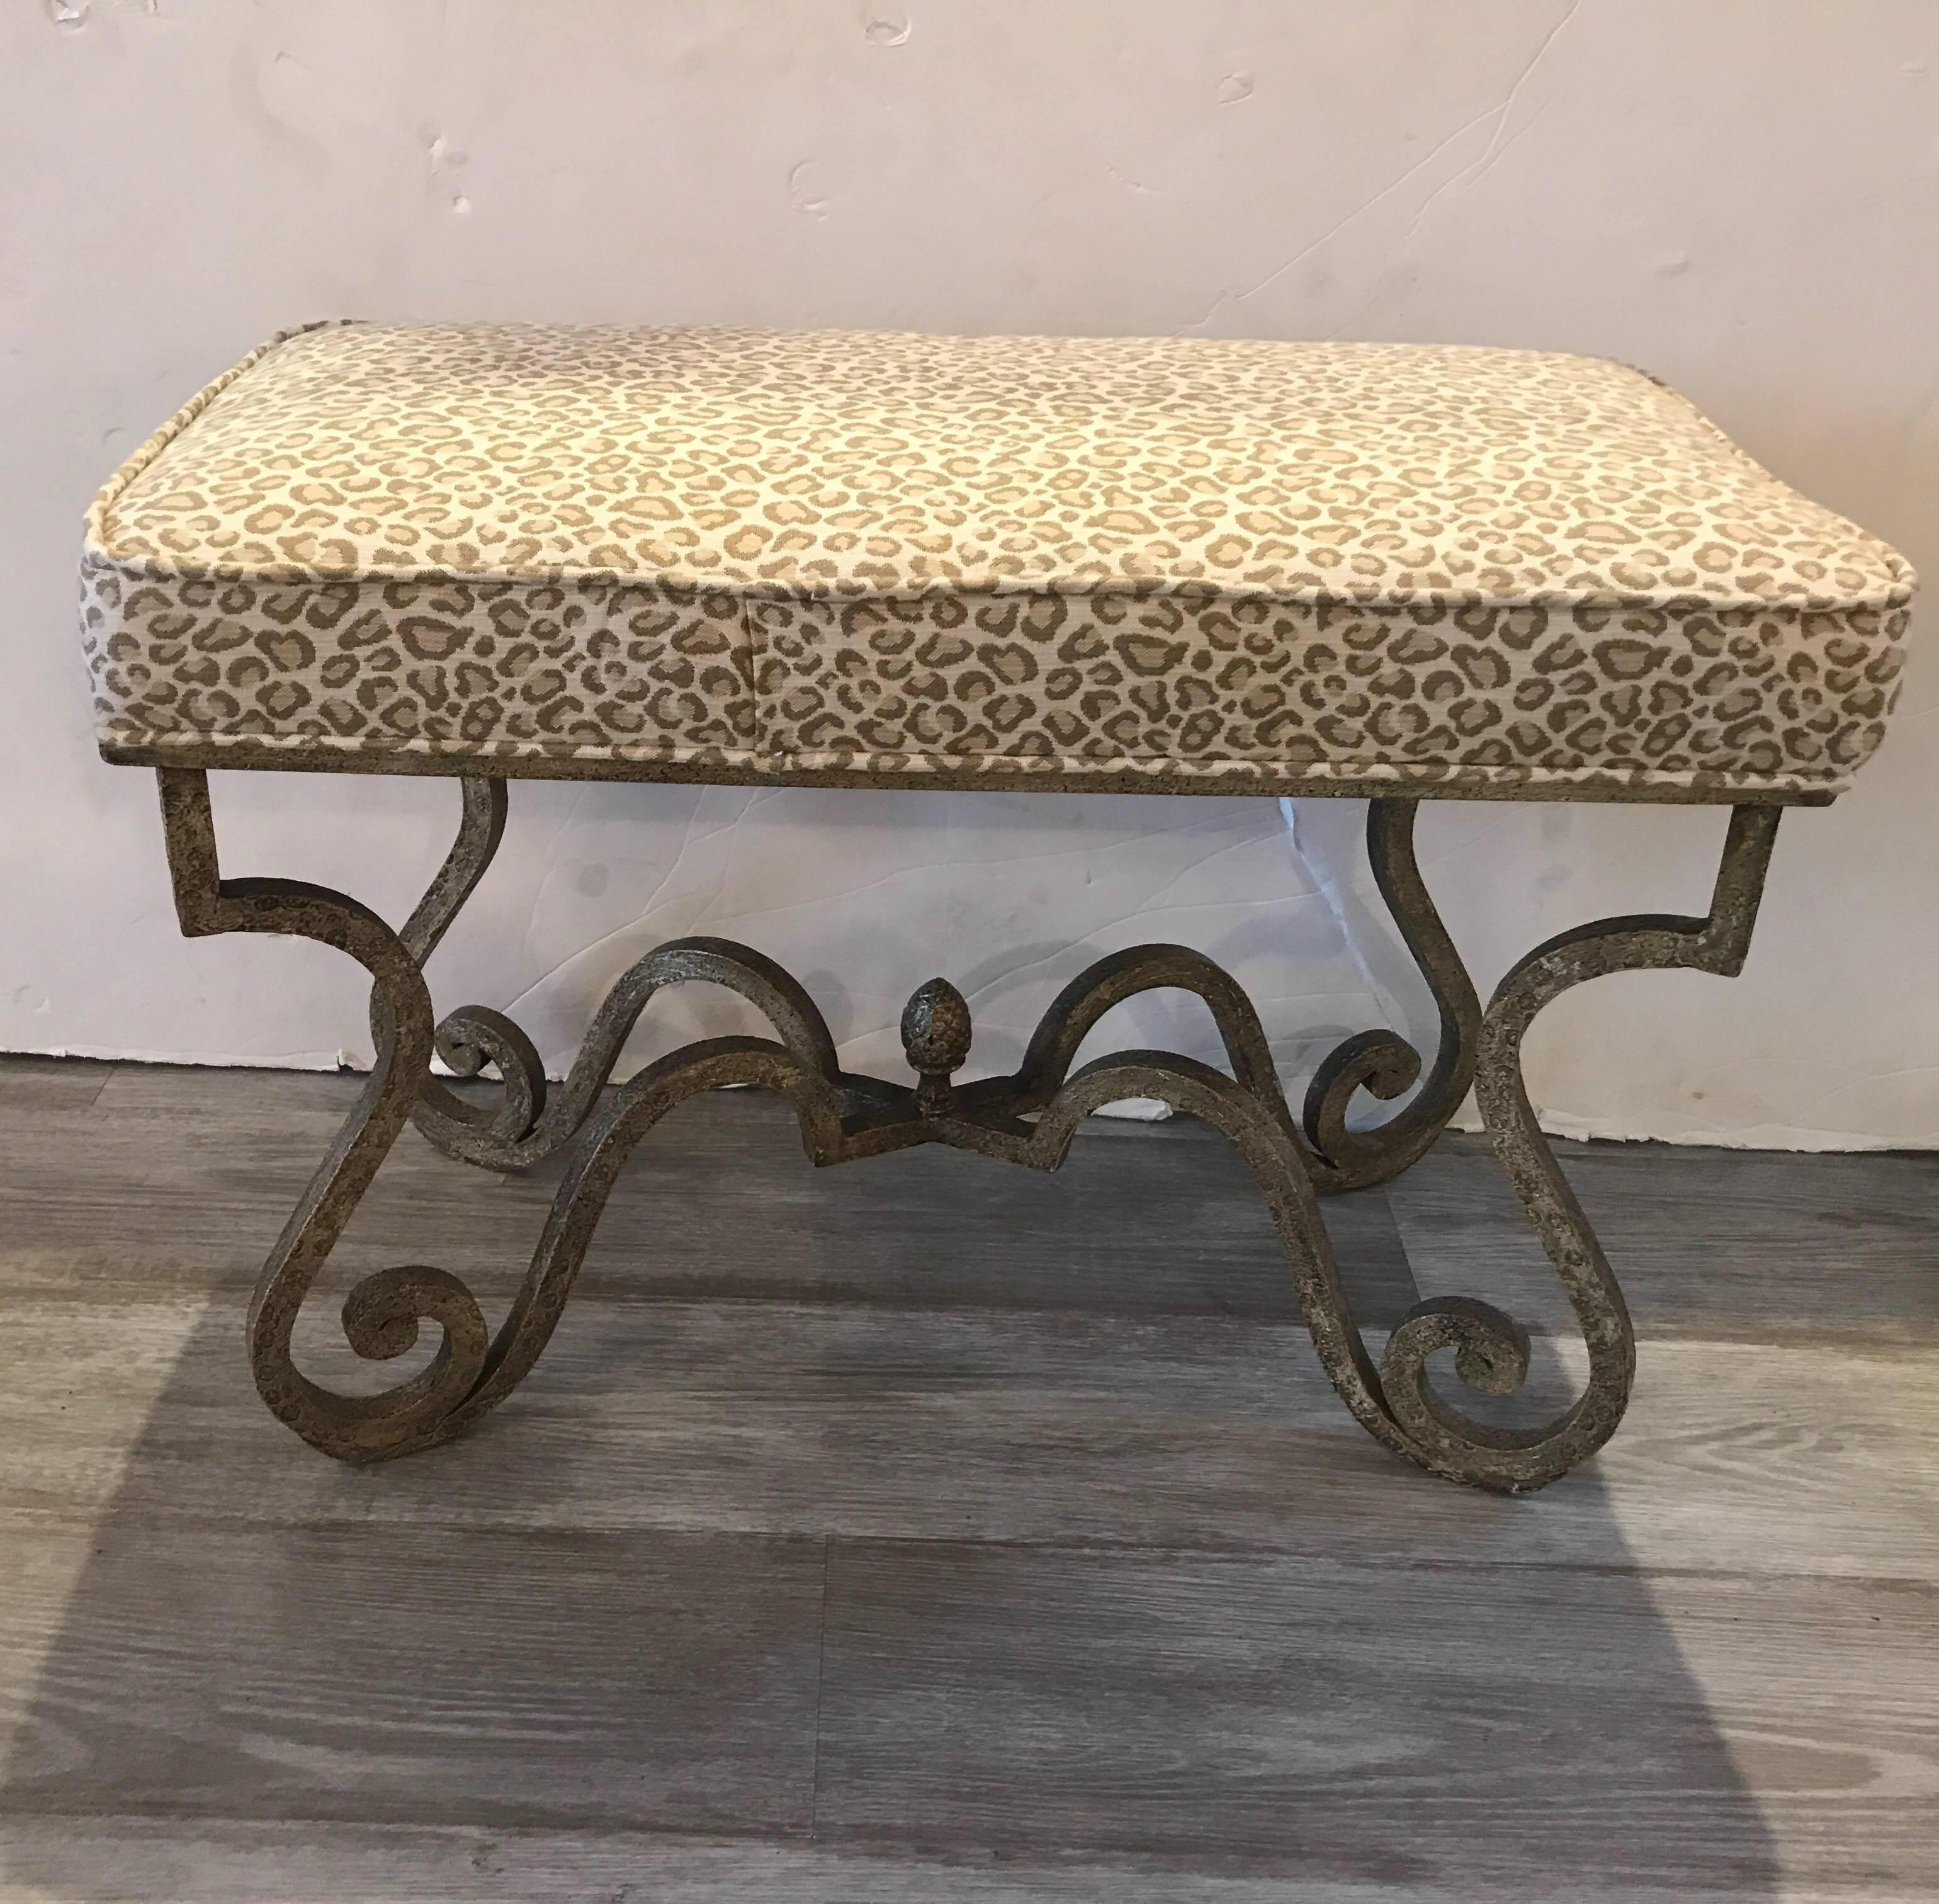 Chic upholstered bench with painted scrolled iron base topped with a neutral beige tone fax animal print fabric.